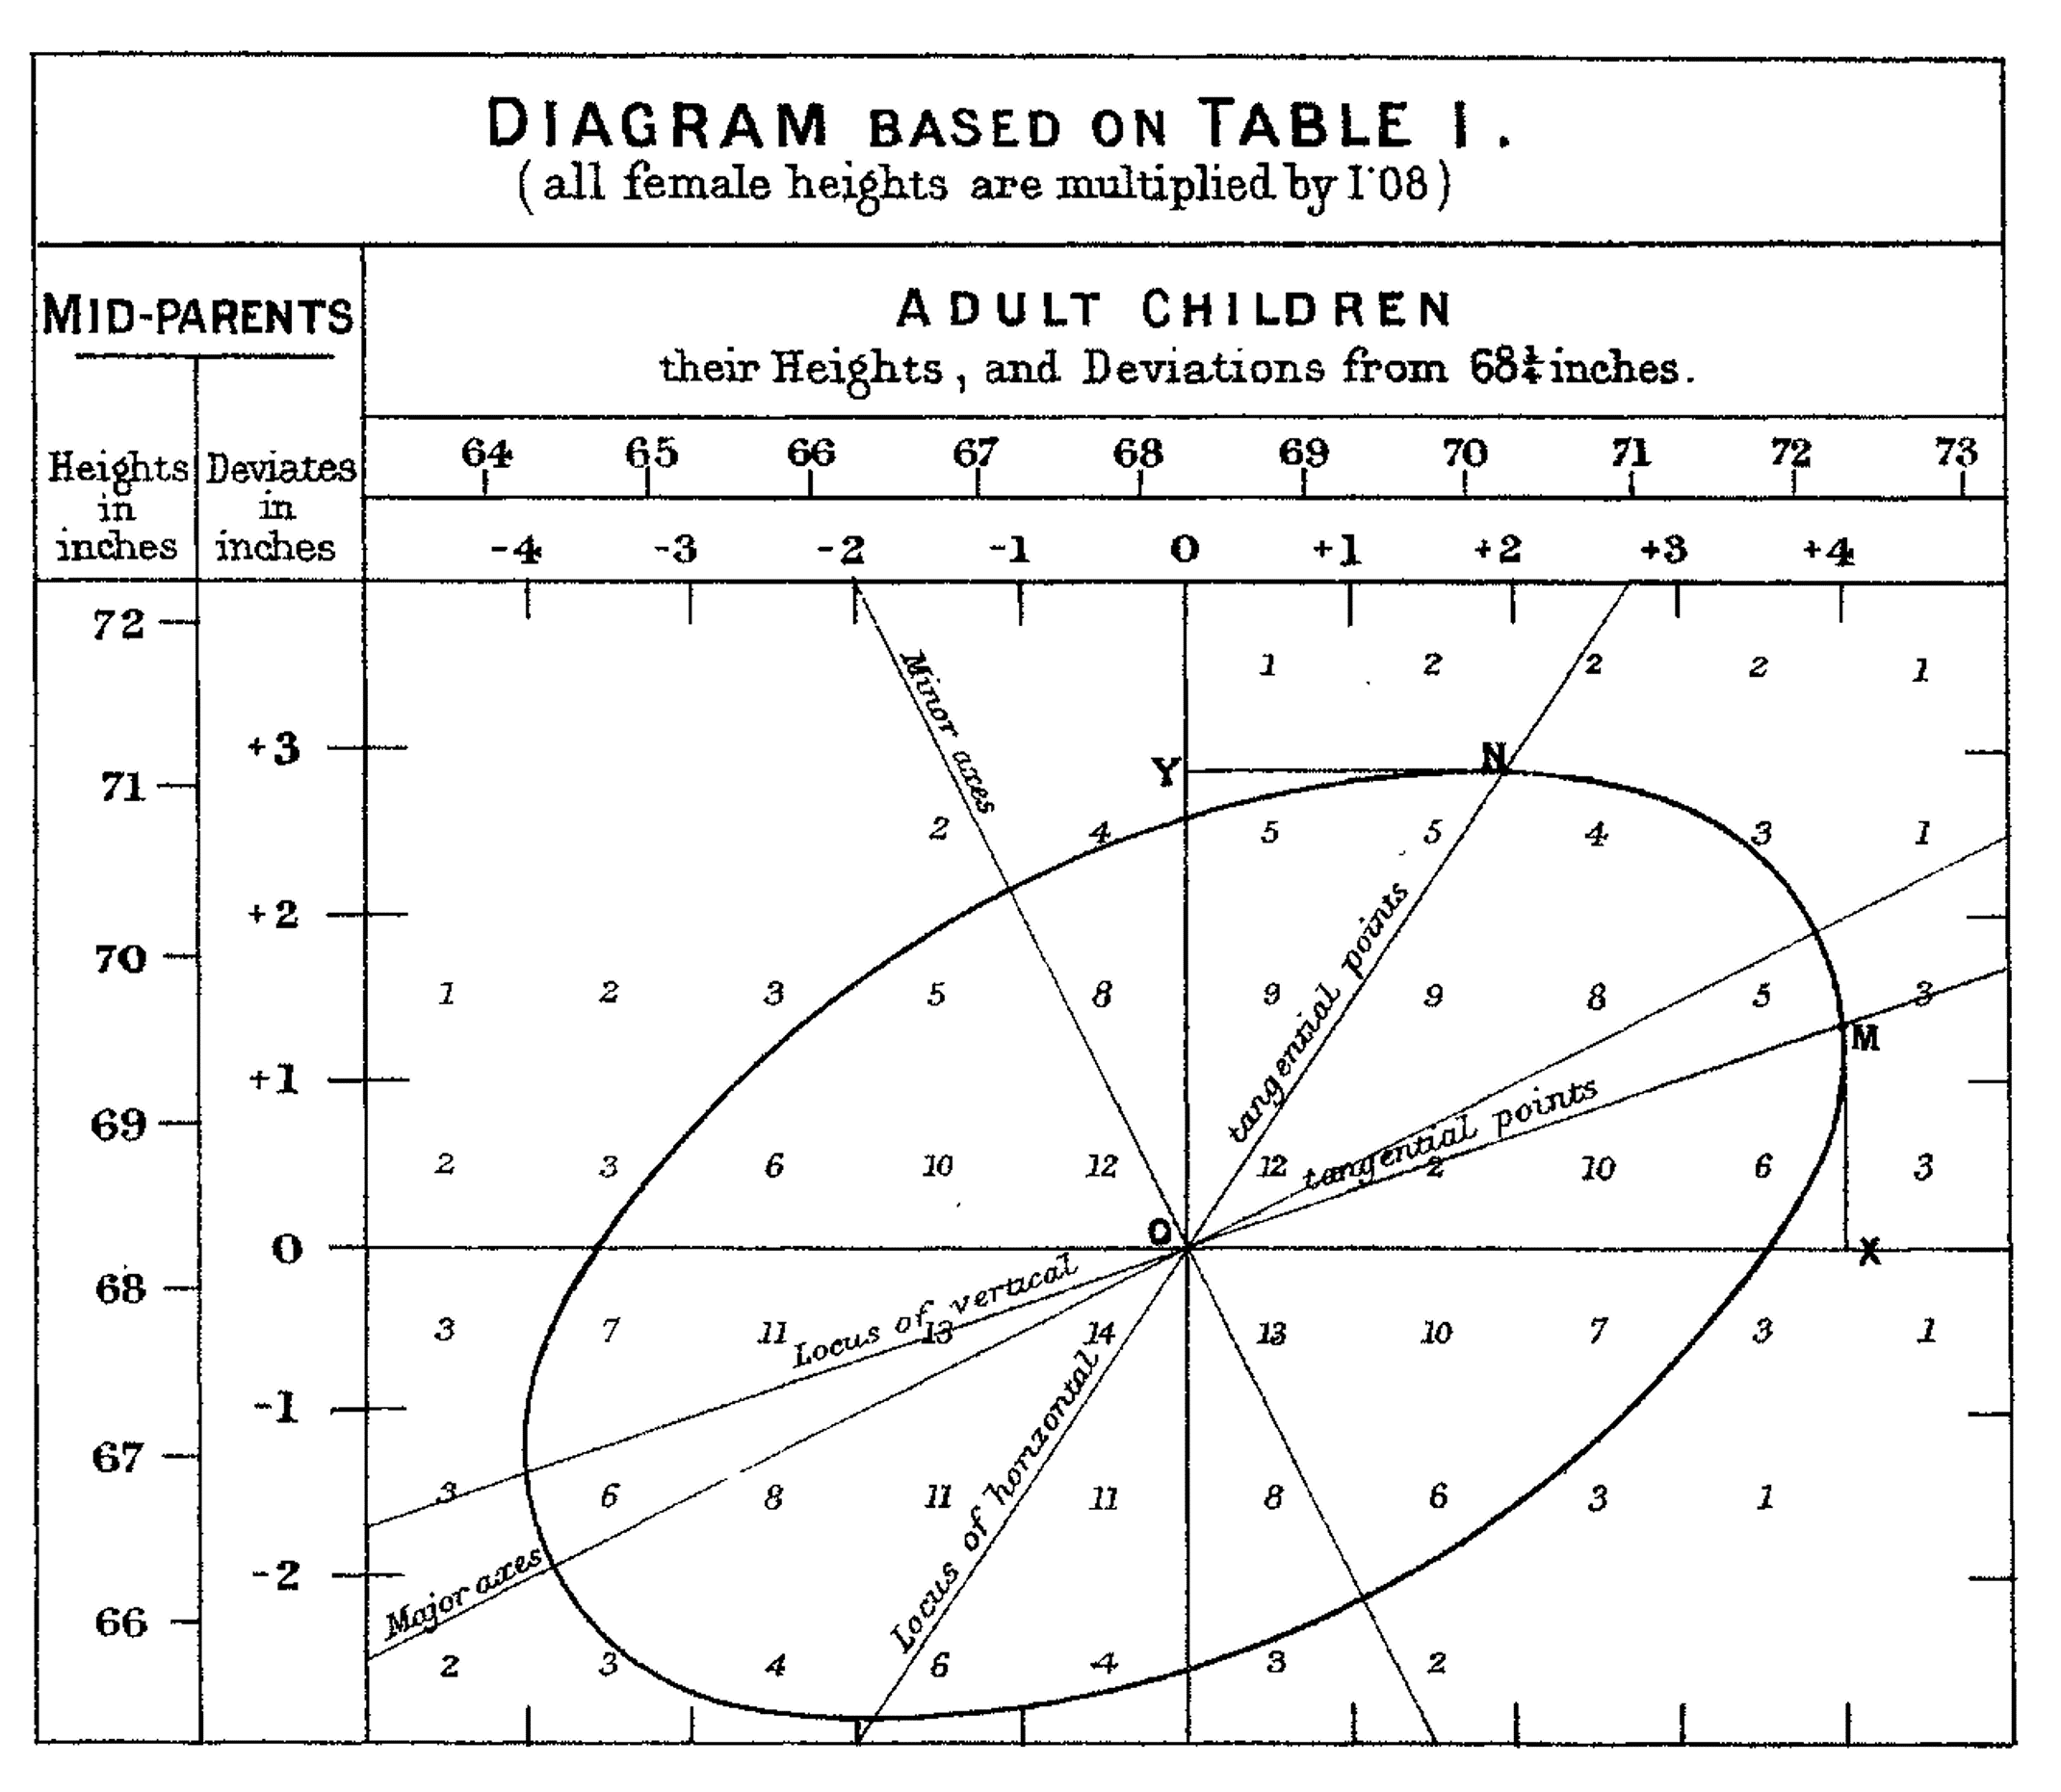 Francis Galton’s (1886) graph with data on Parent height ('mid-parents height') and Child height ('Adult children height').